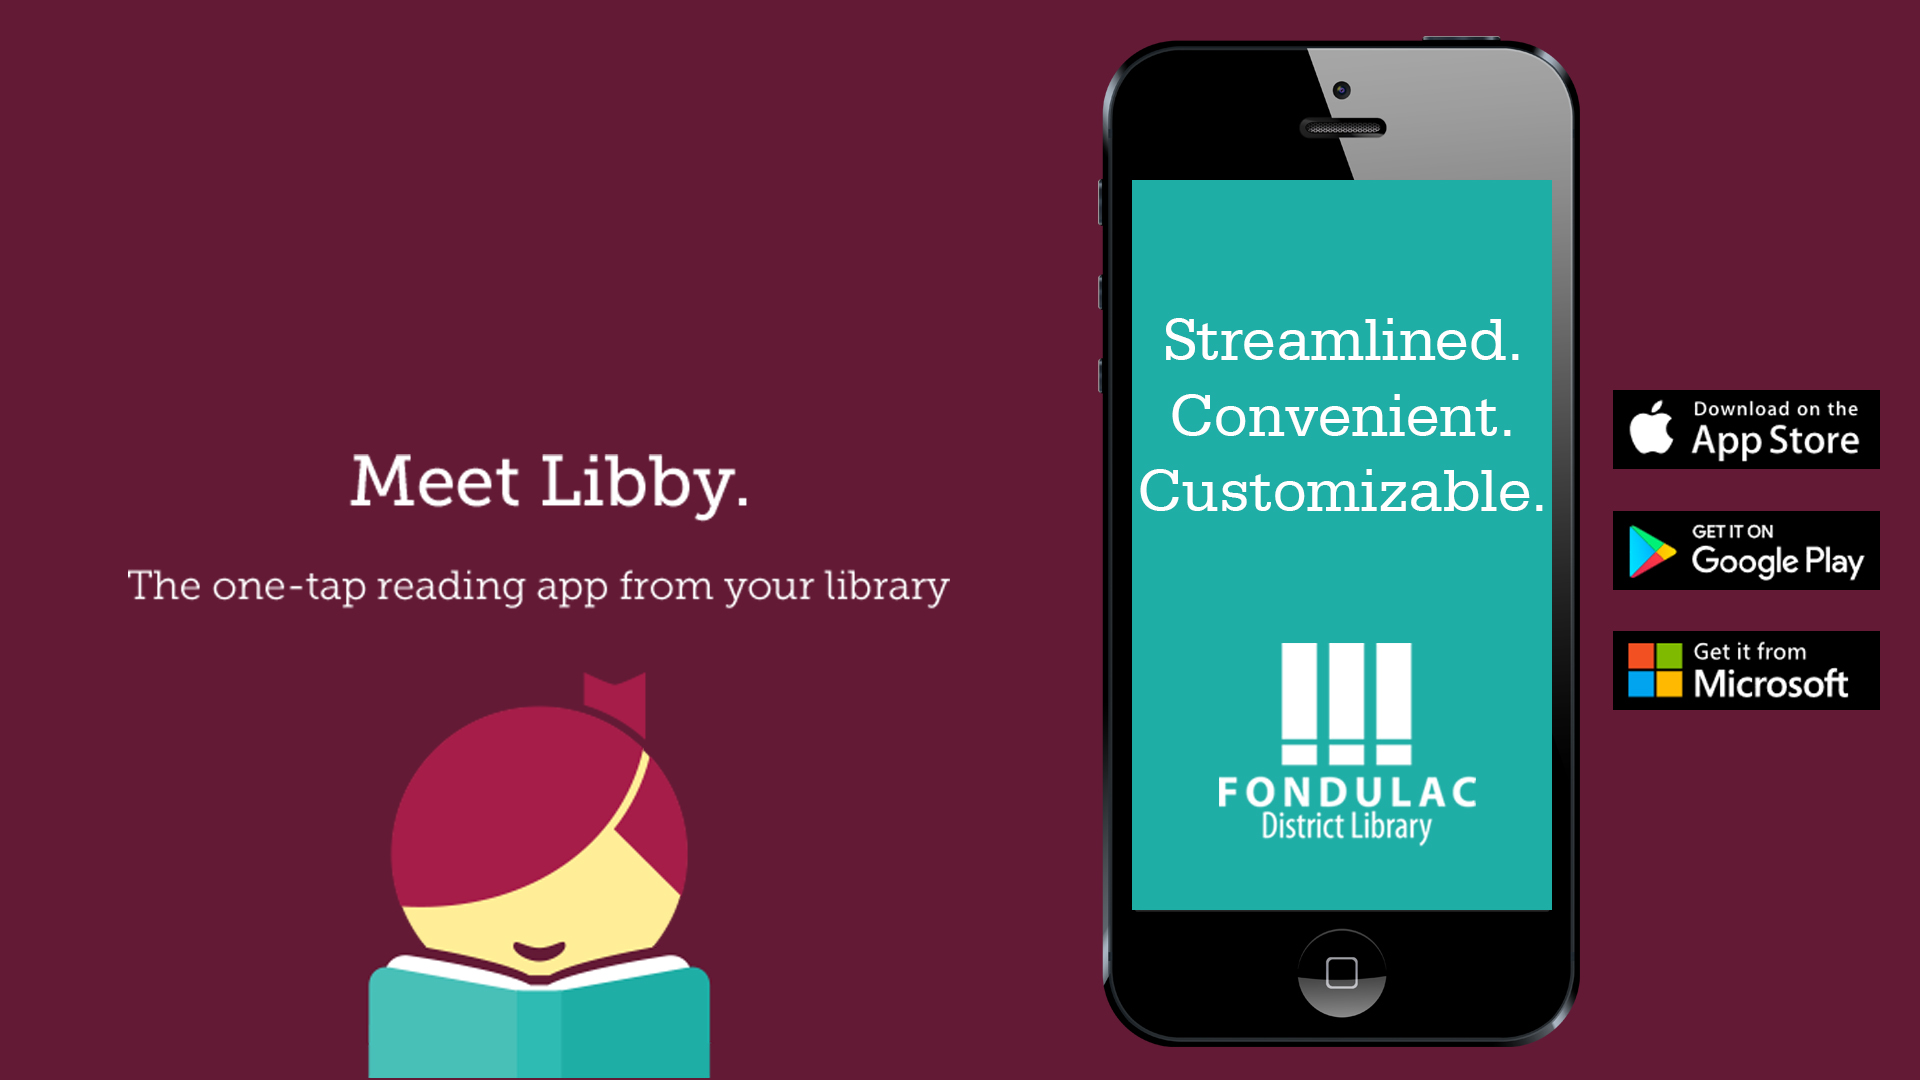 Introducing the Libby App Fondulac District Library East Peoria, IL